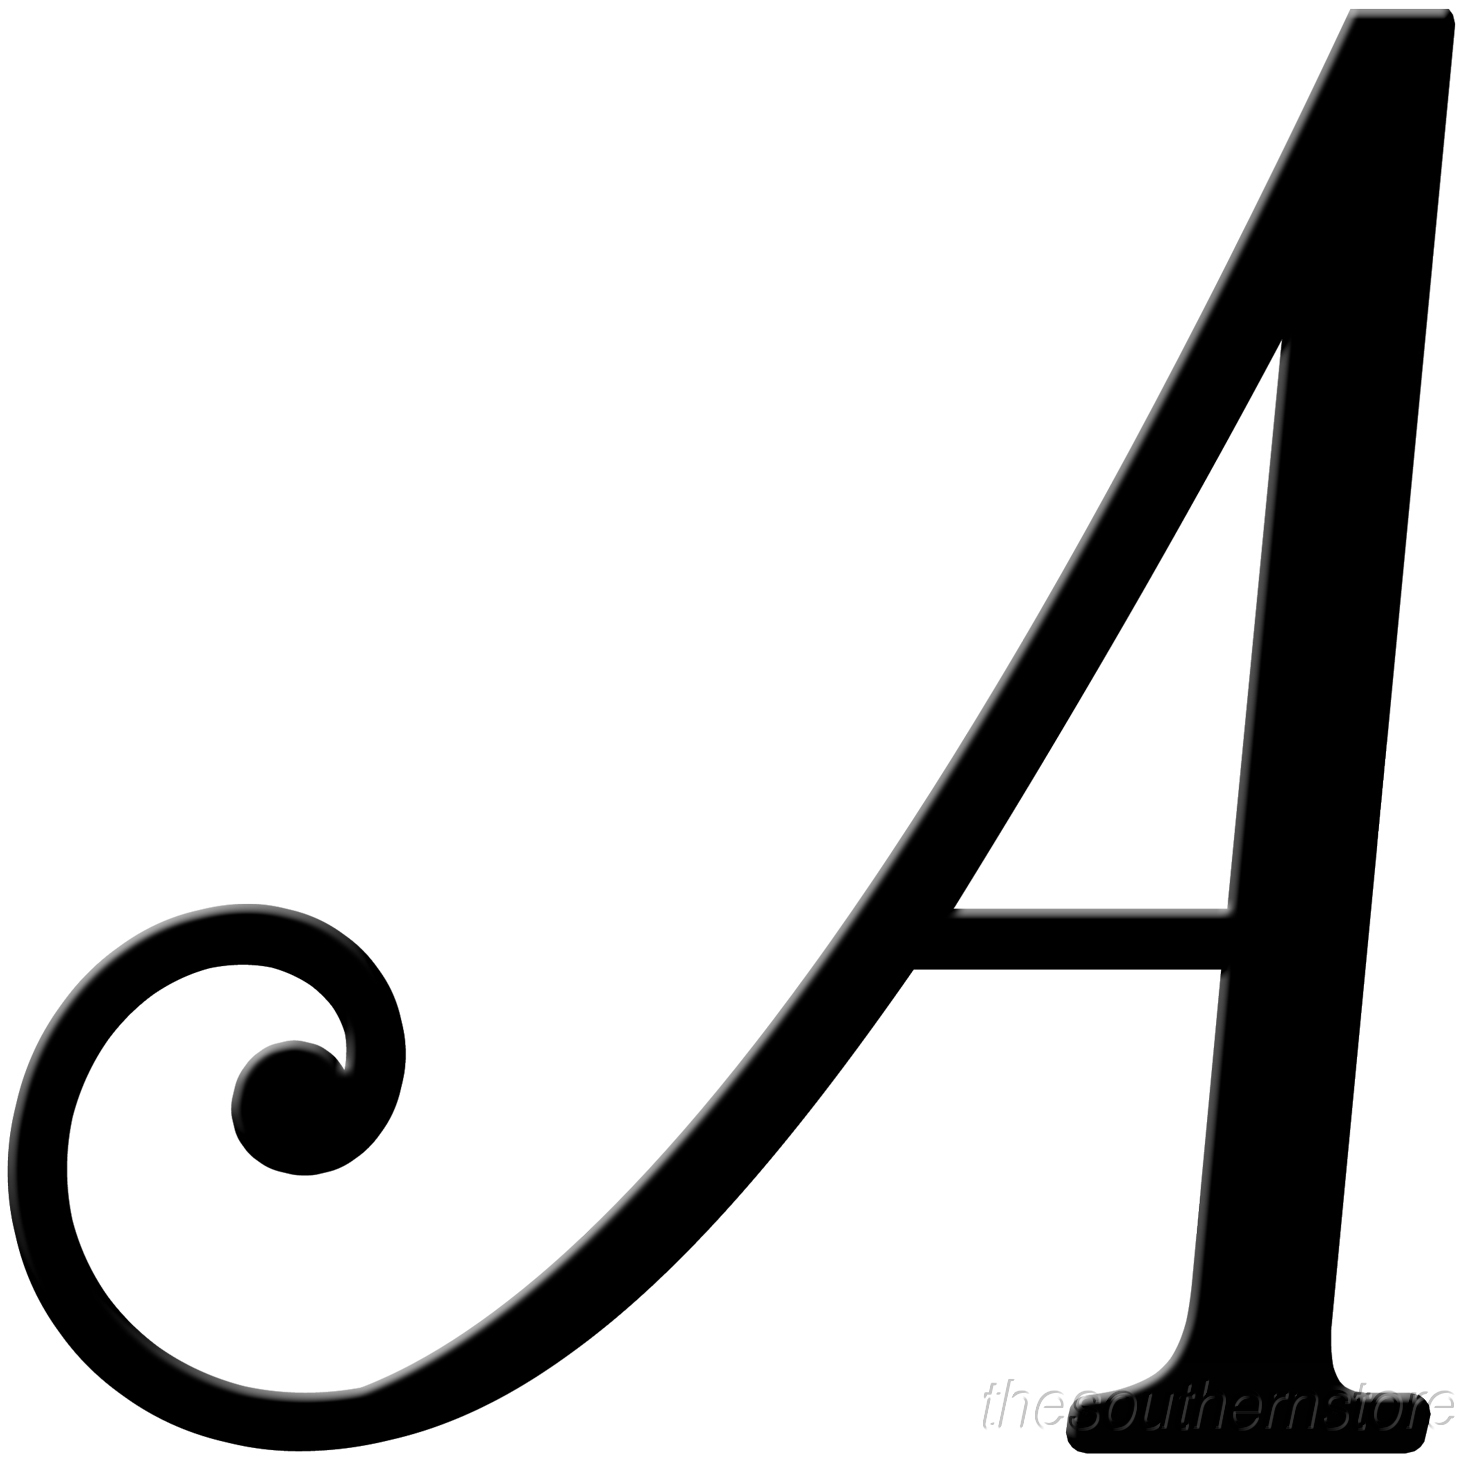 Free Fancy Alphabet Clipart, Download Free Fancy Alphabet Clipart png image, Free ClipArts on Clipart Library